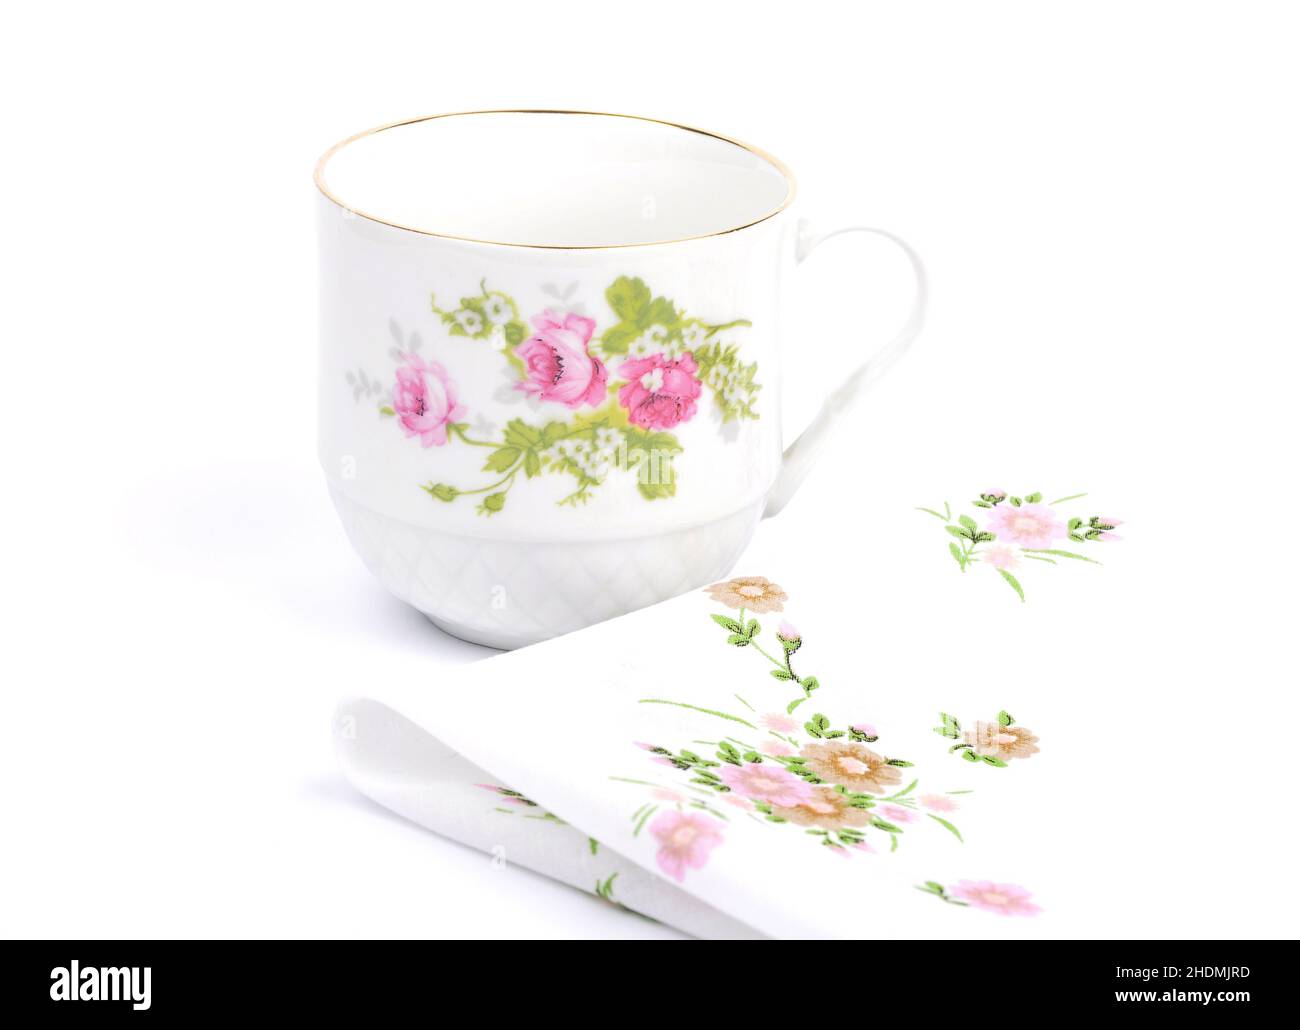 cup, flower pattern, cups, flower patterns, patterns Stock Photo